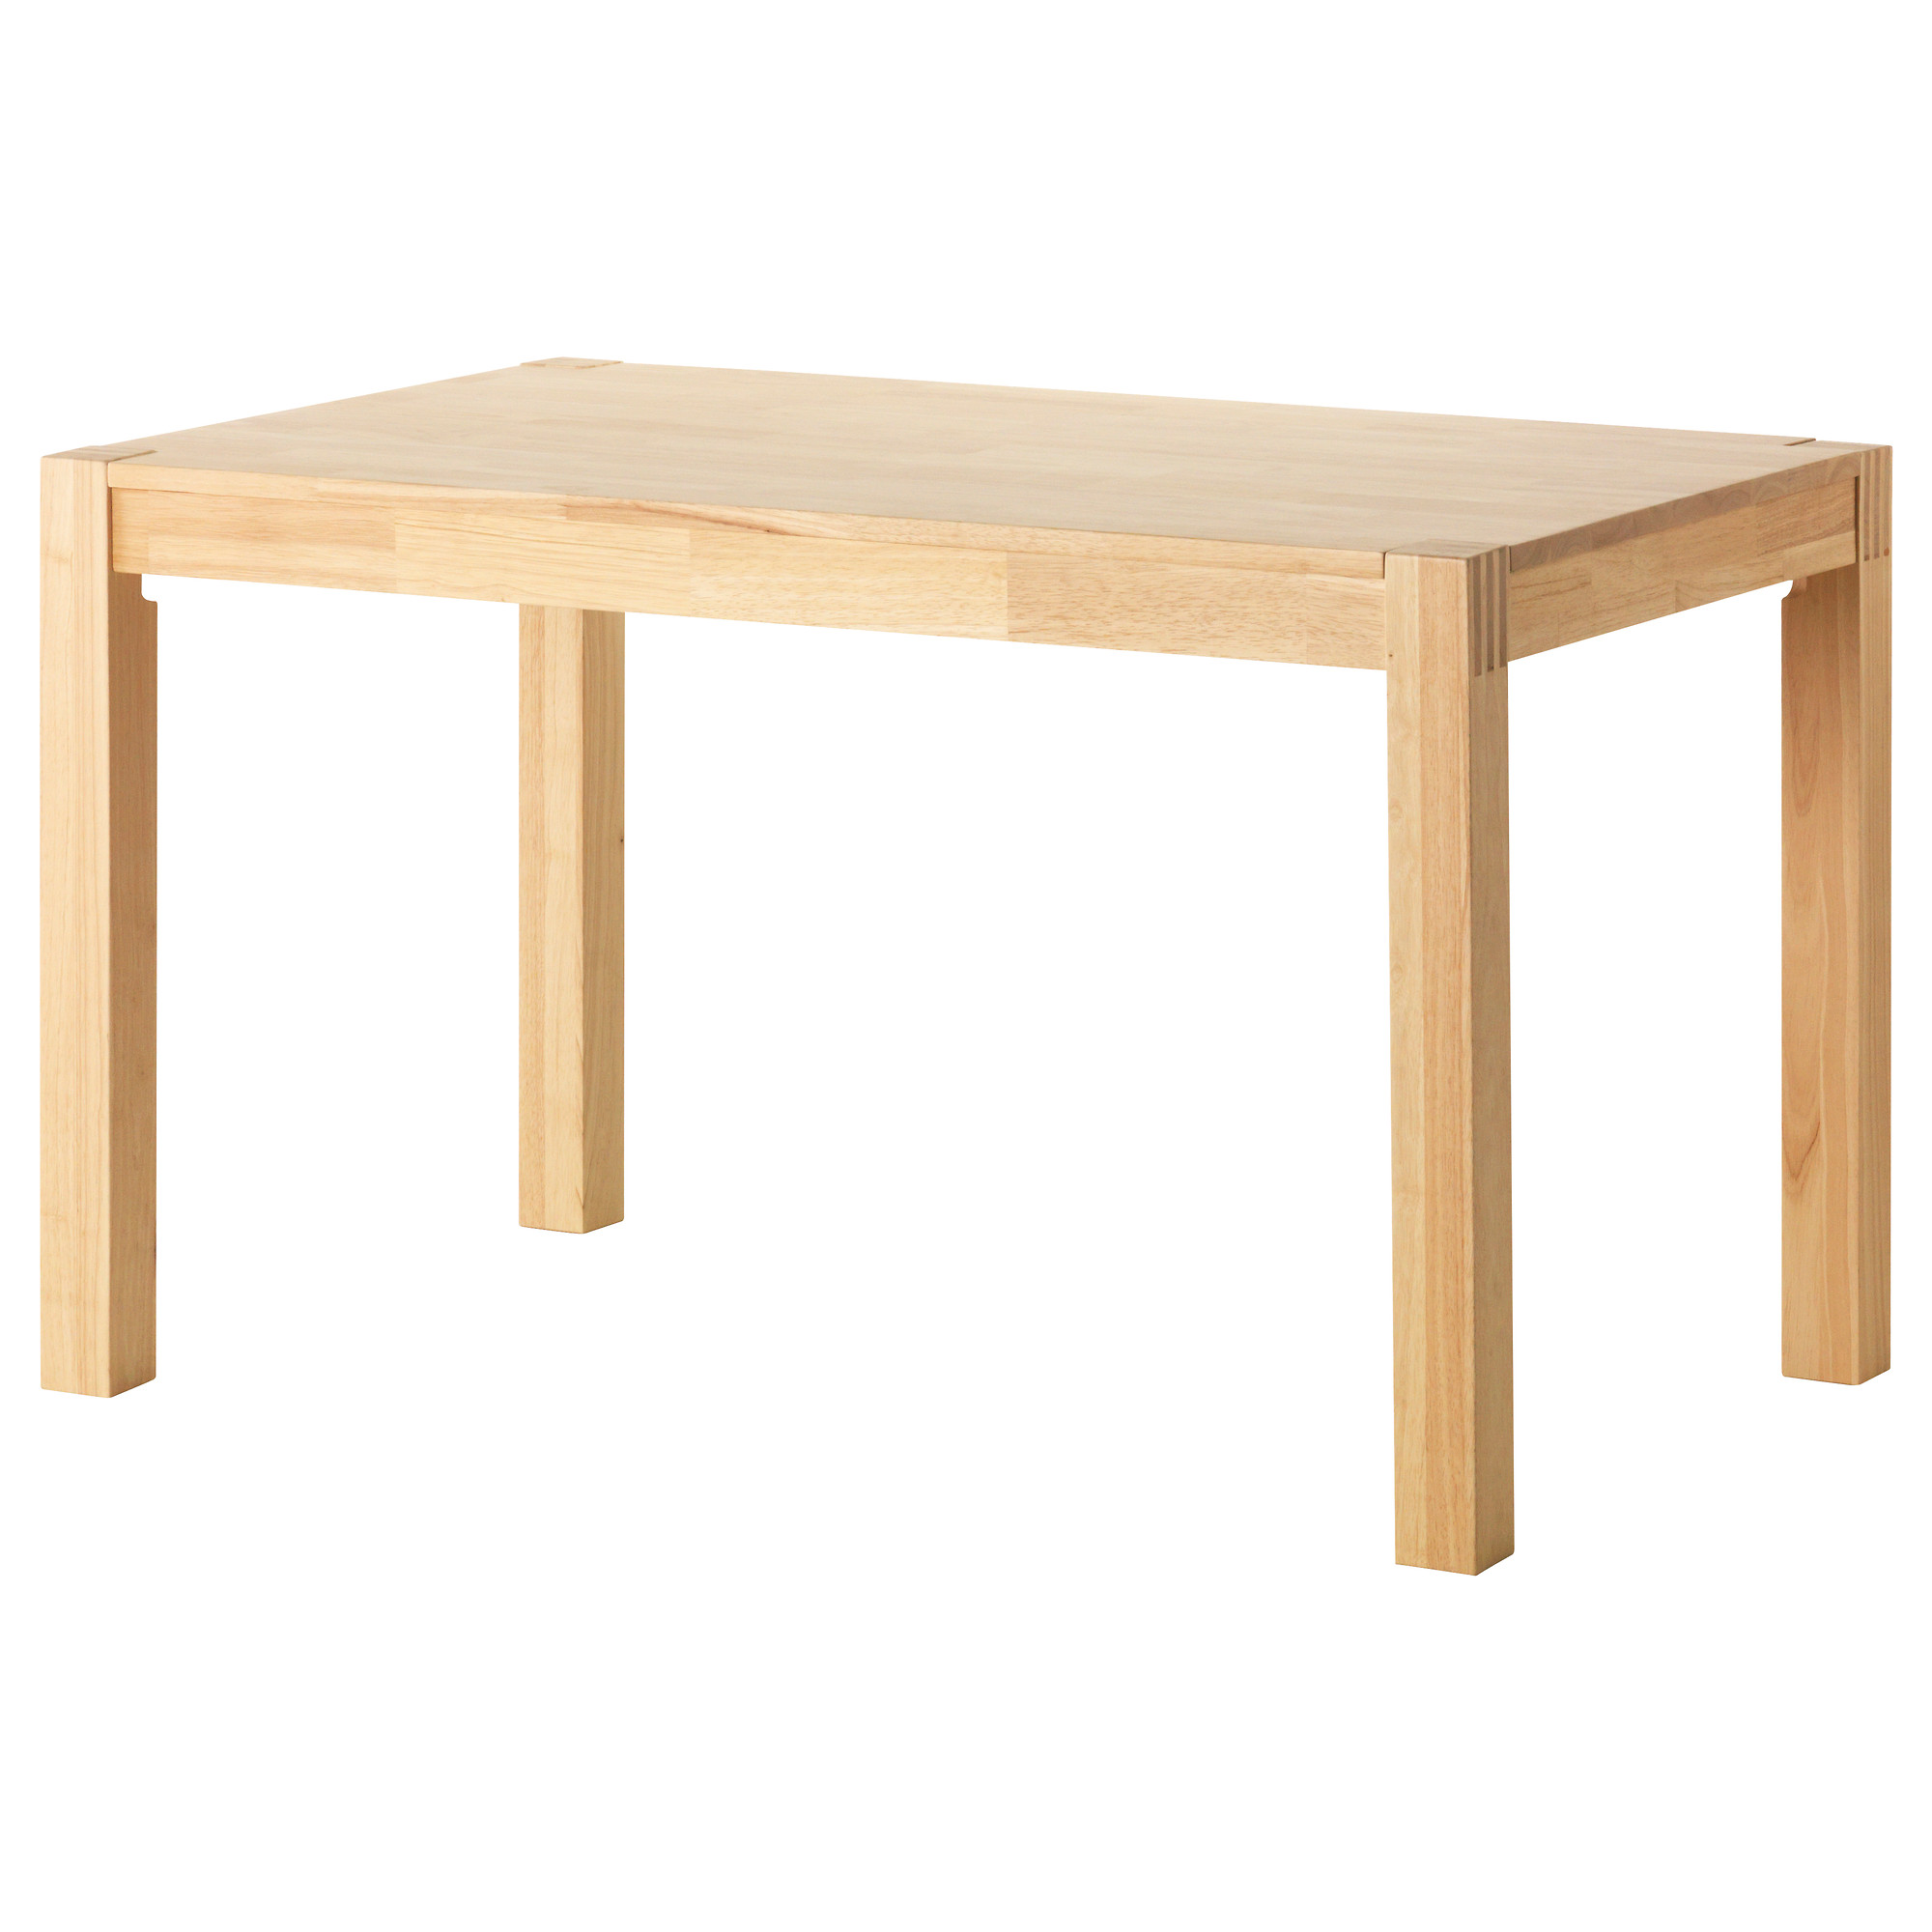 NORDBY table